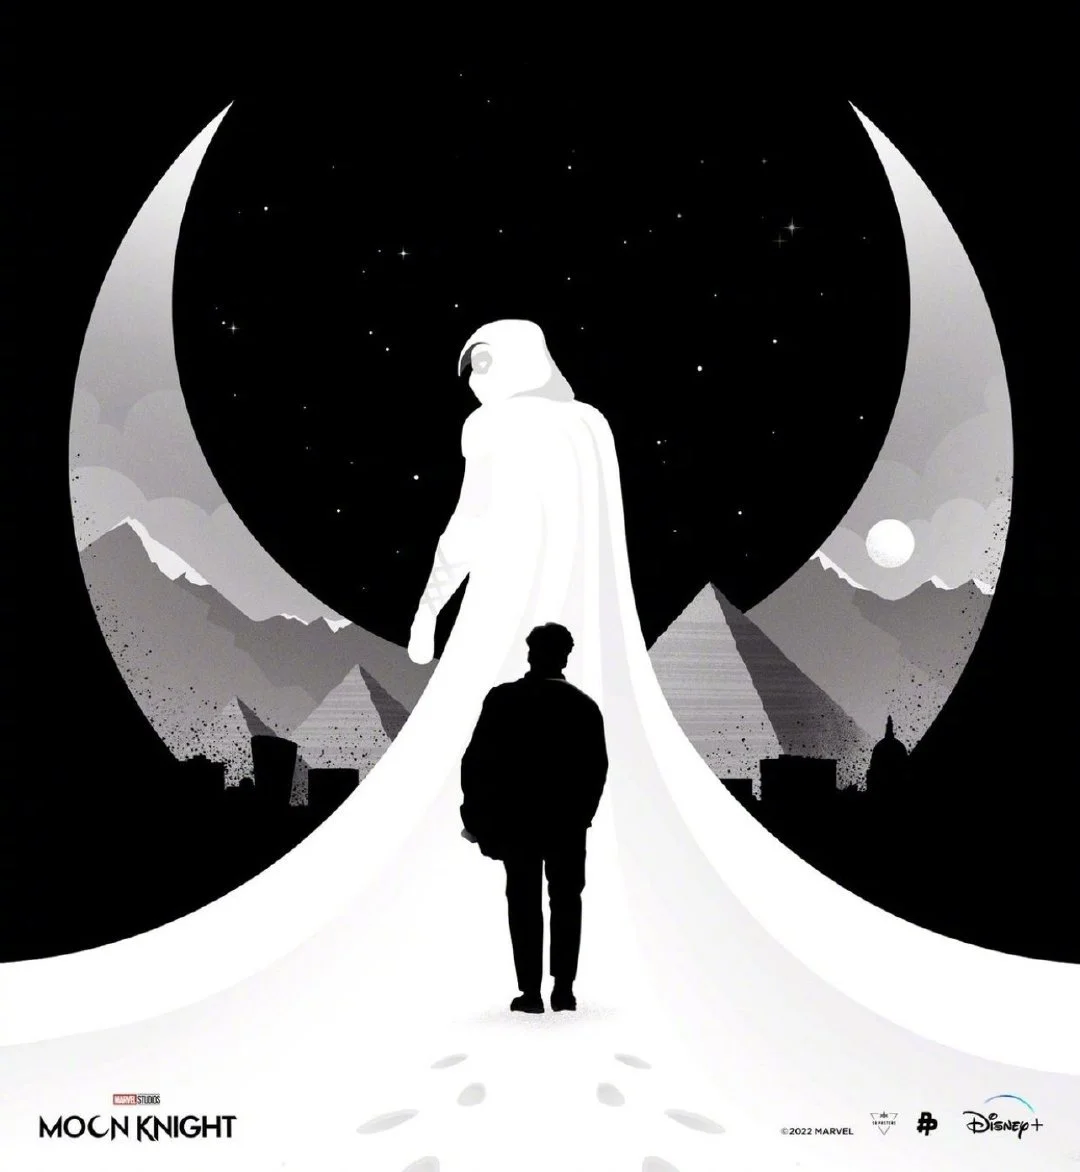 Marvel's new drama "Moon Knight" released art poster